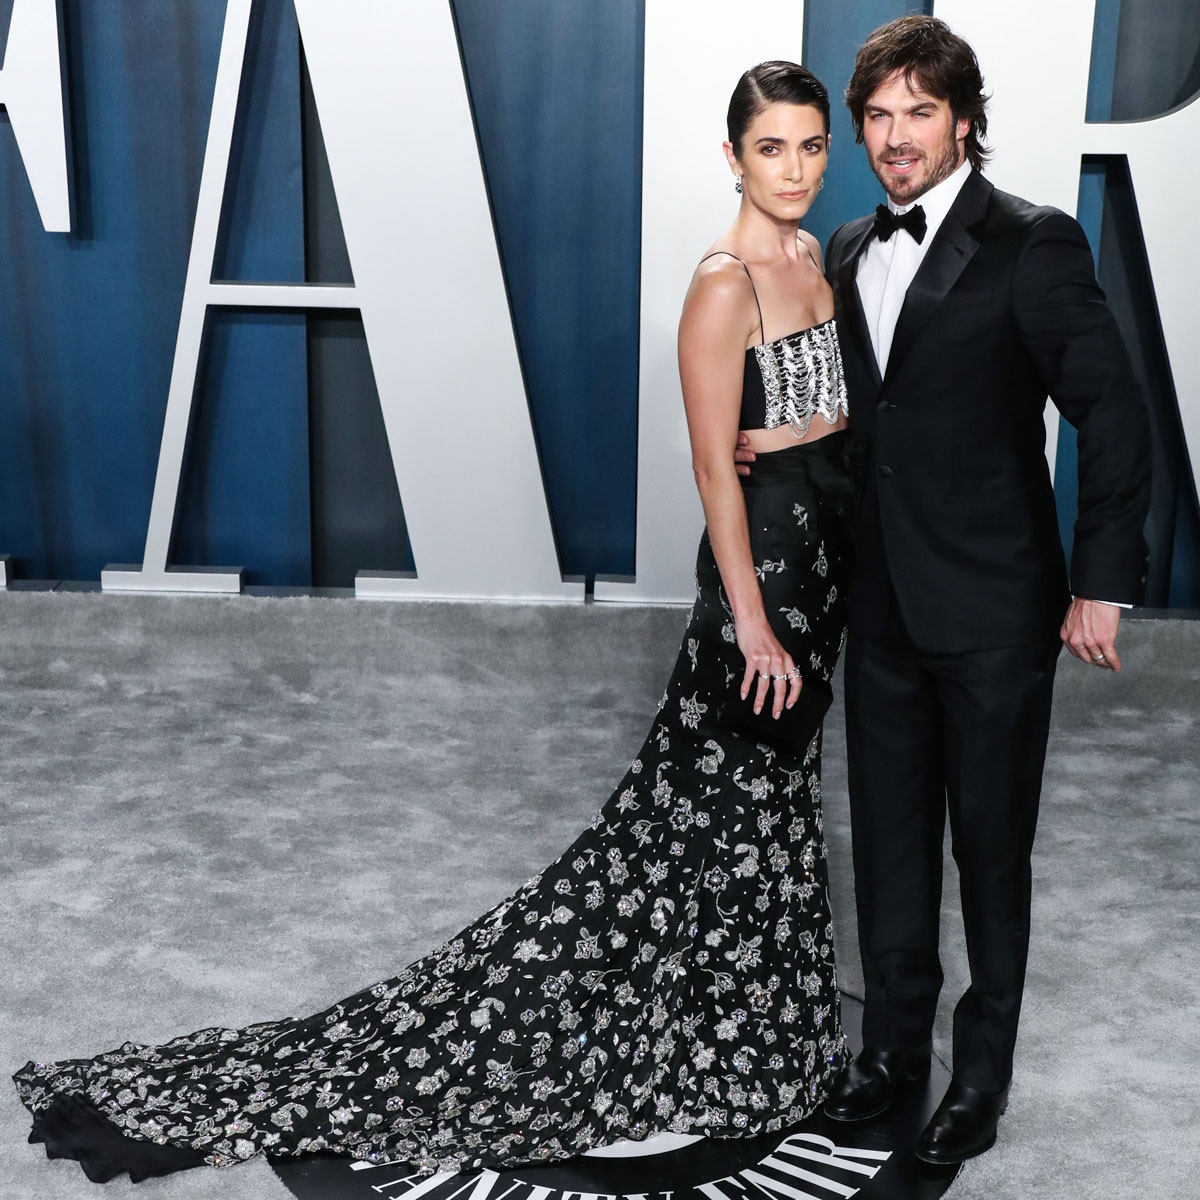 Nikki Reed and Ian Somerhalder arrive at the 2020 Vanity Fair Oscar Party held at the Wallis Annenbe...